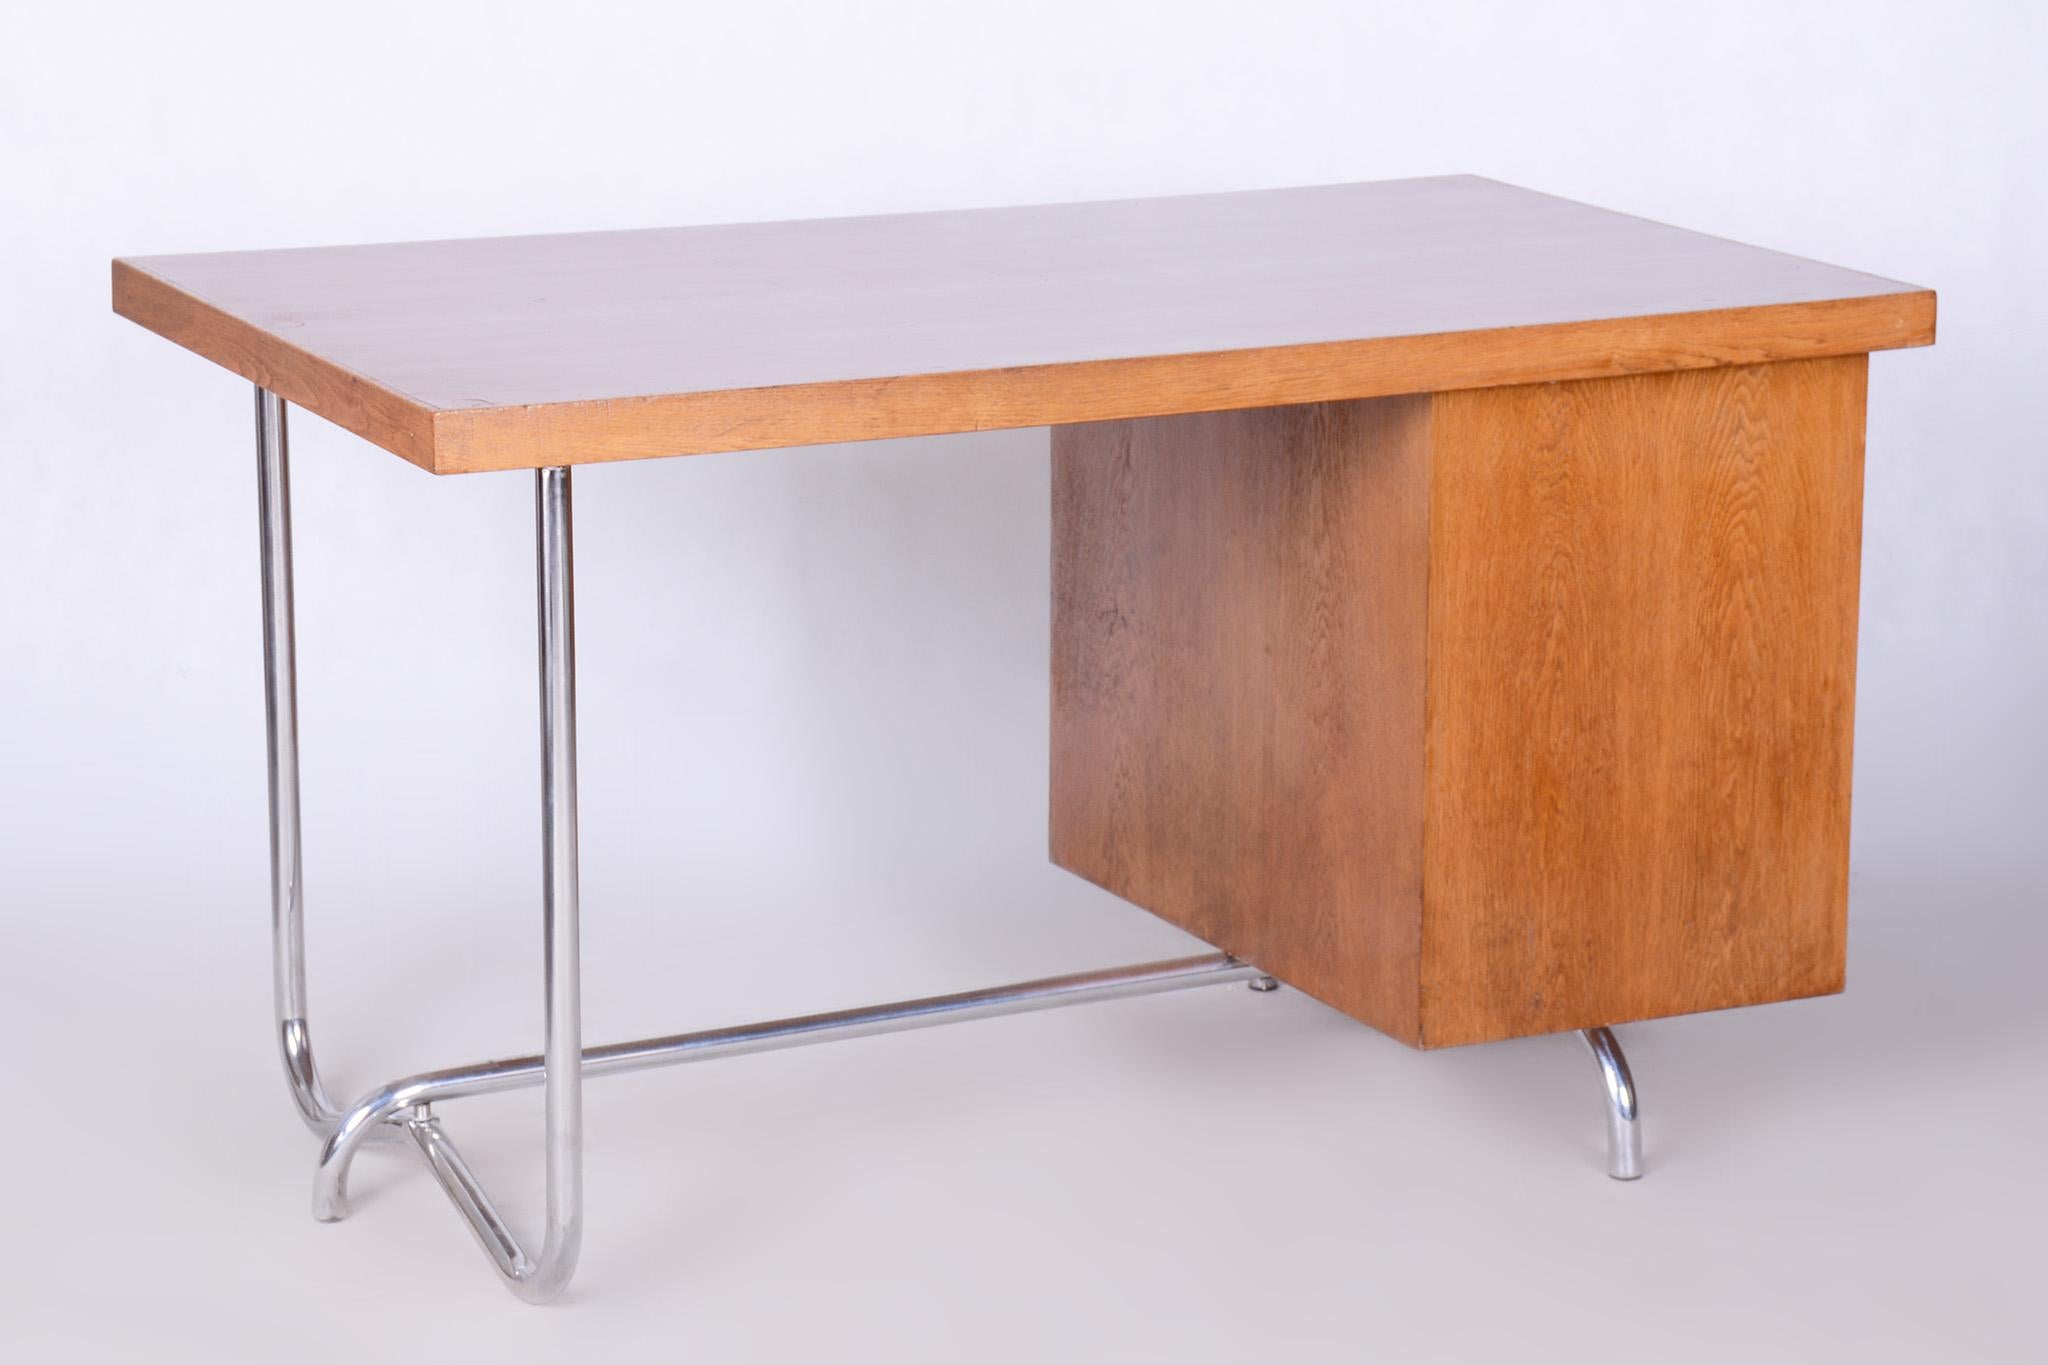 Restored Bauhaus Oak Writing Desk by Hynek Gottwald.

Period: 1930-1939
Source: Czechia (Czechoslovakia)
Material: Oak, Chrome-Plated Steel
Leg space:
Height: 74,5 cm (29.3 in)
Width: 77 cm (30.3 in)

Revived polish. The chrome parts have been